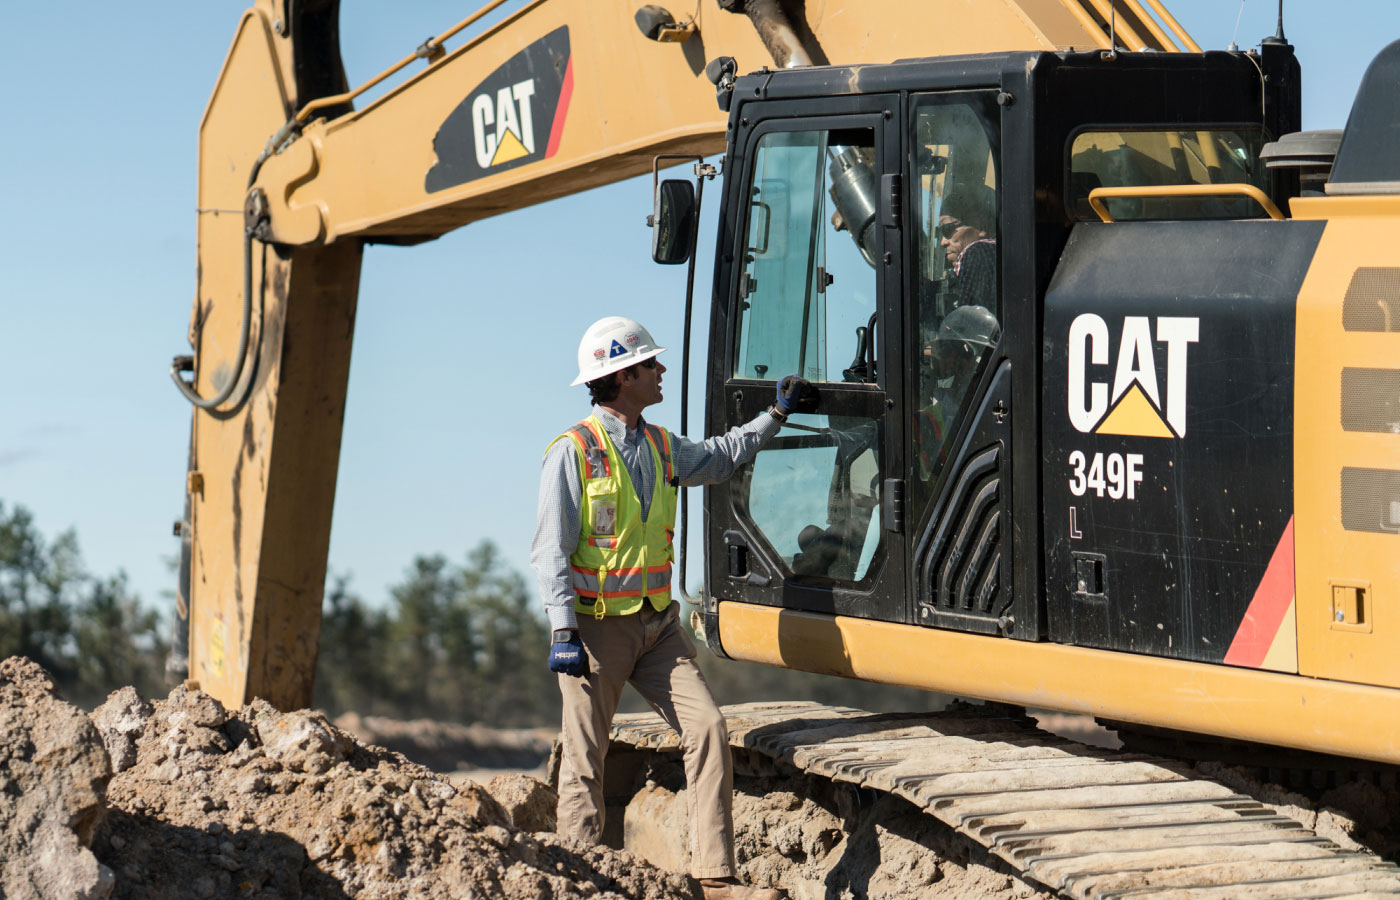 Heath C. Hanna In A Hard Hat & Neon Vest Talking With Contour Team Member Operating A Cat 349f At Mining Job Site